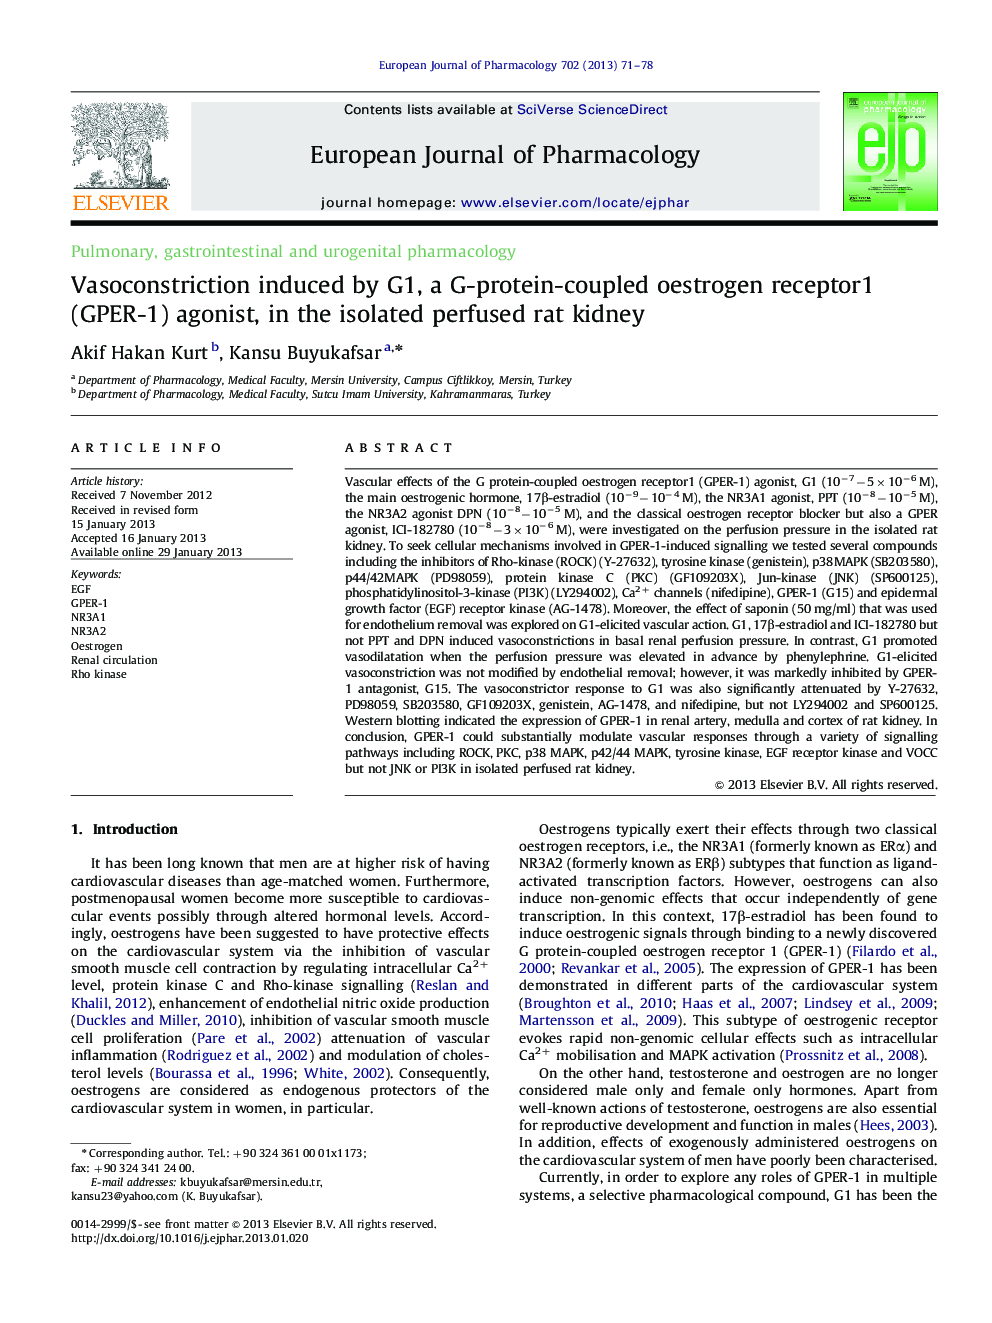 Vasoconstriction induced by G1, a G-protein-coupled oestrogen receptor1 (GPER-1) agonist, in the isolated perfused rat kidney